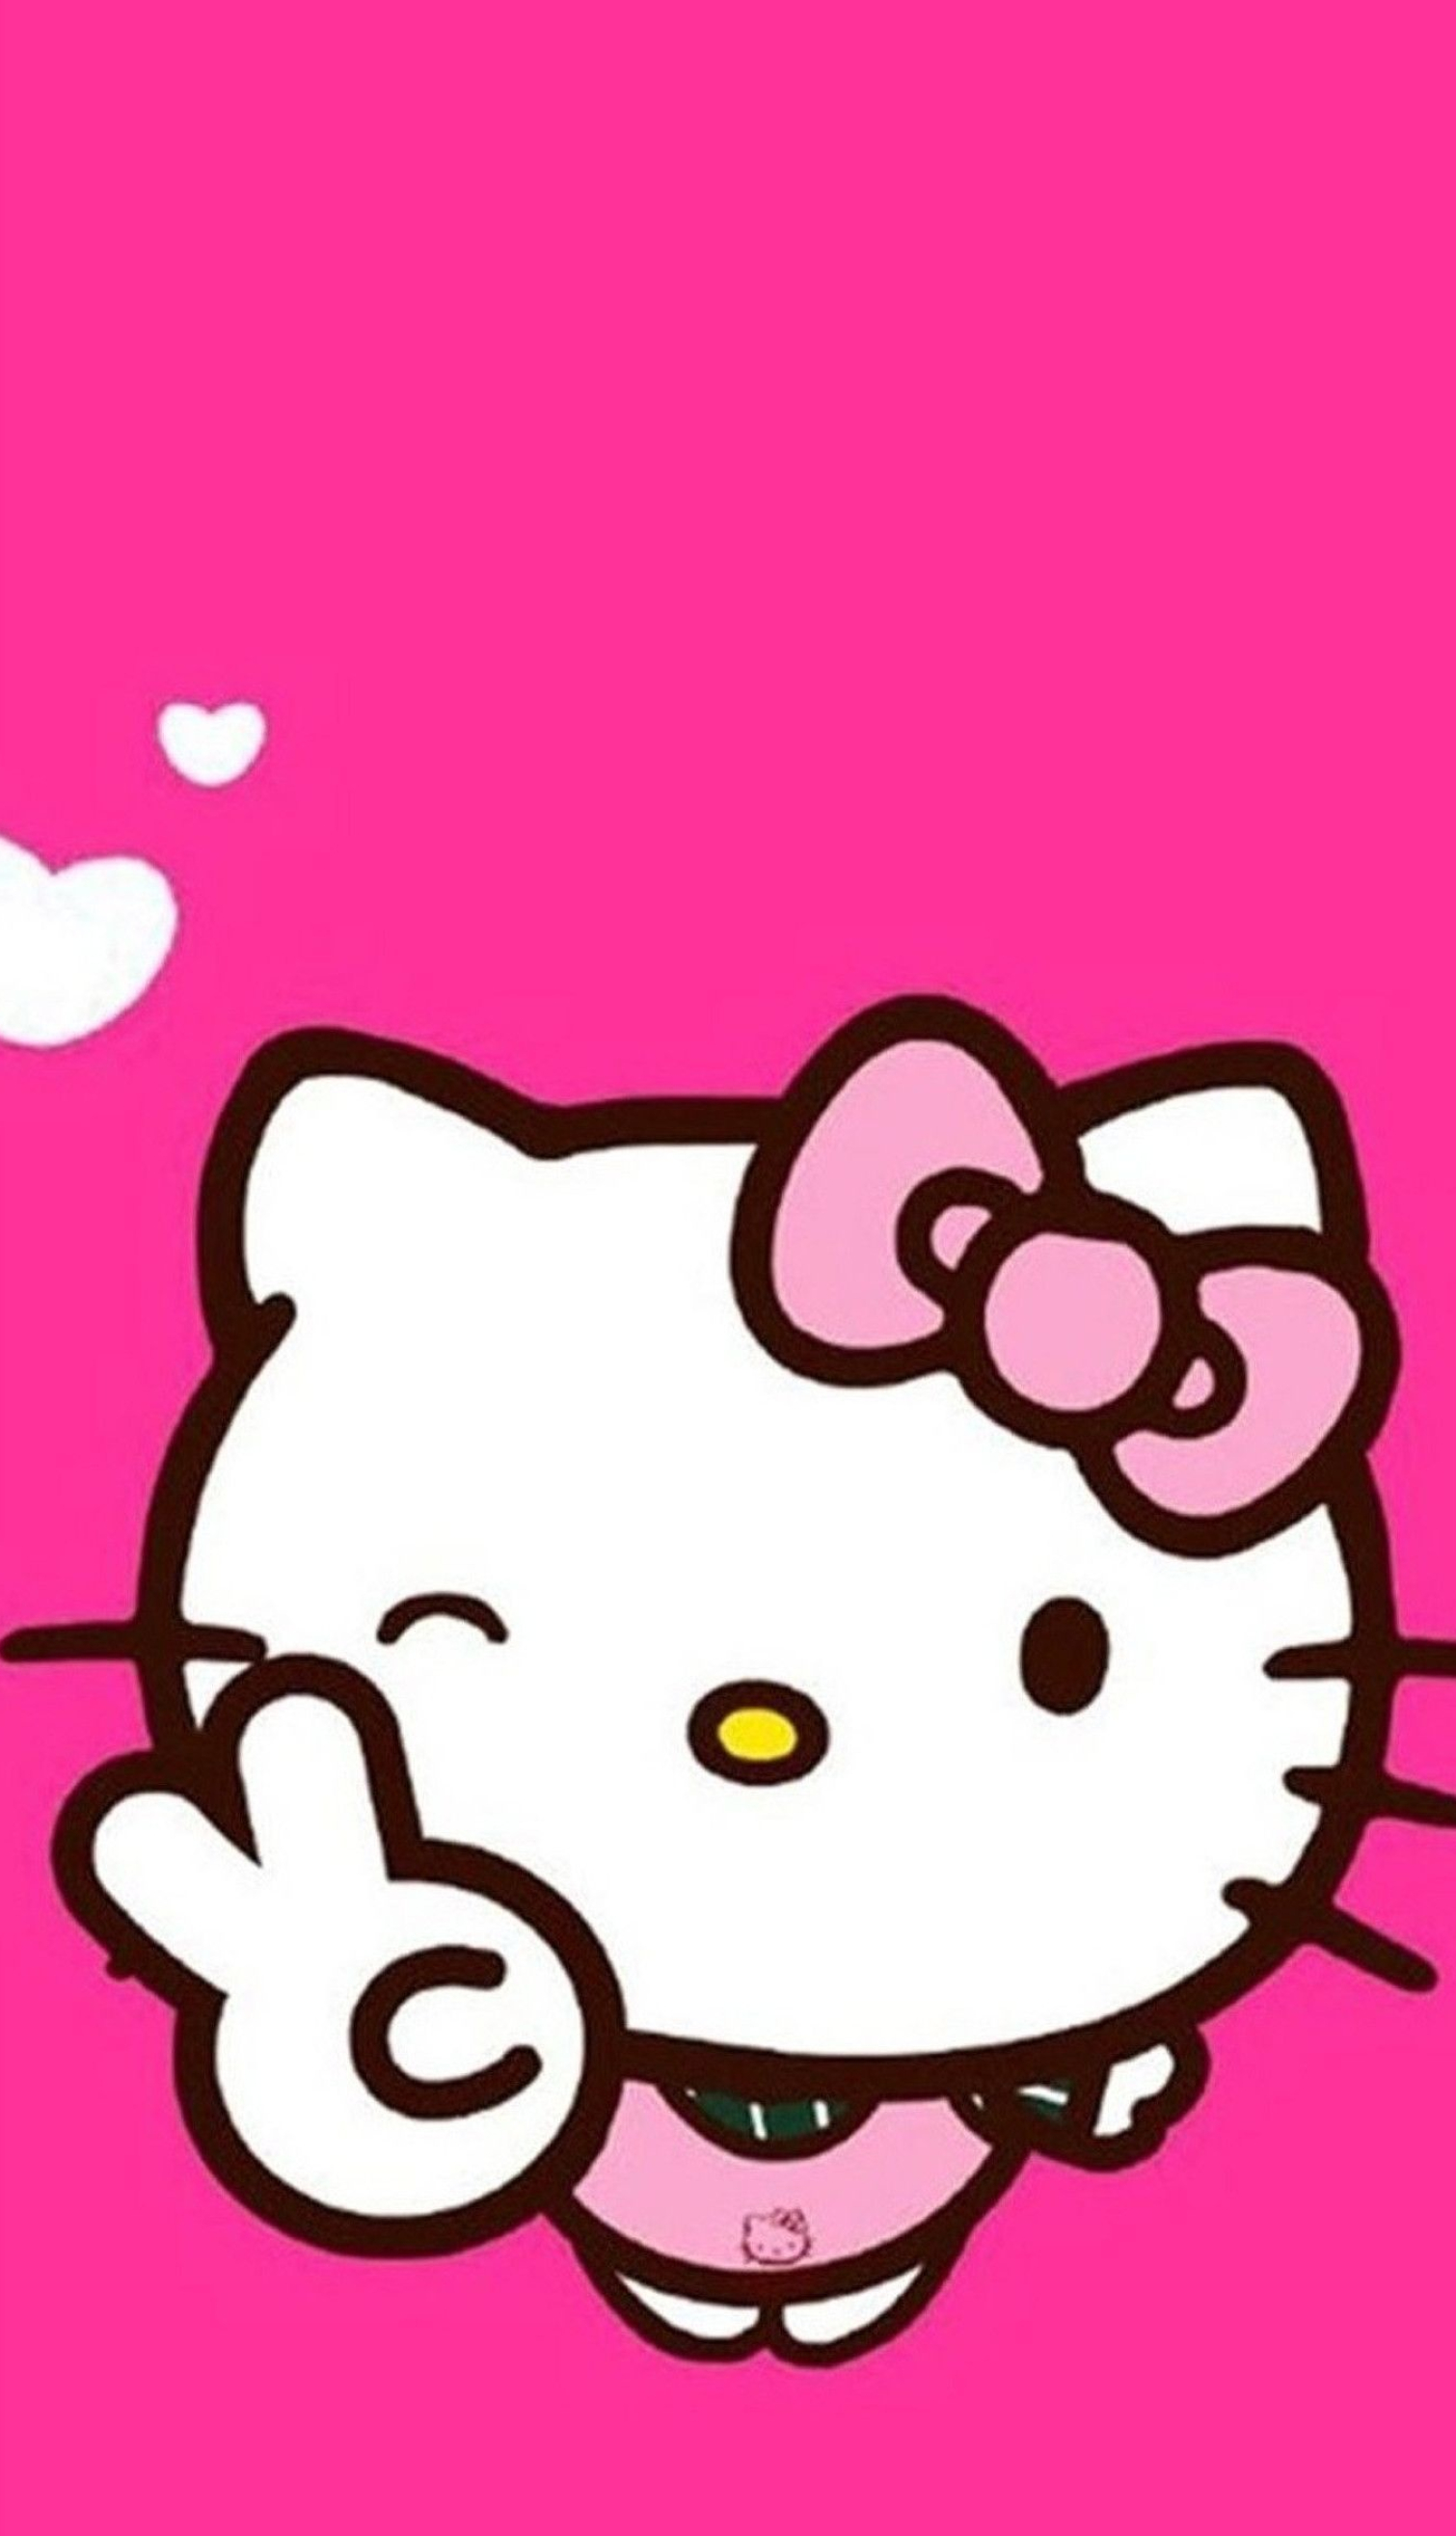 Hello Kitty: The character's popularity also grew with the emergence of kawaii culture. 1510x2630 HD Wallpaper.